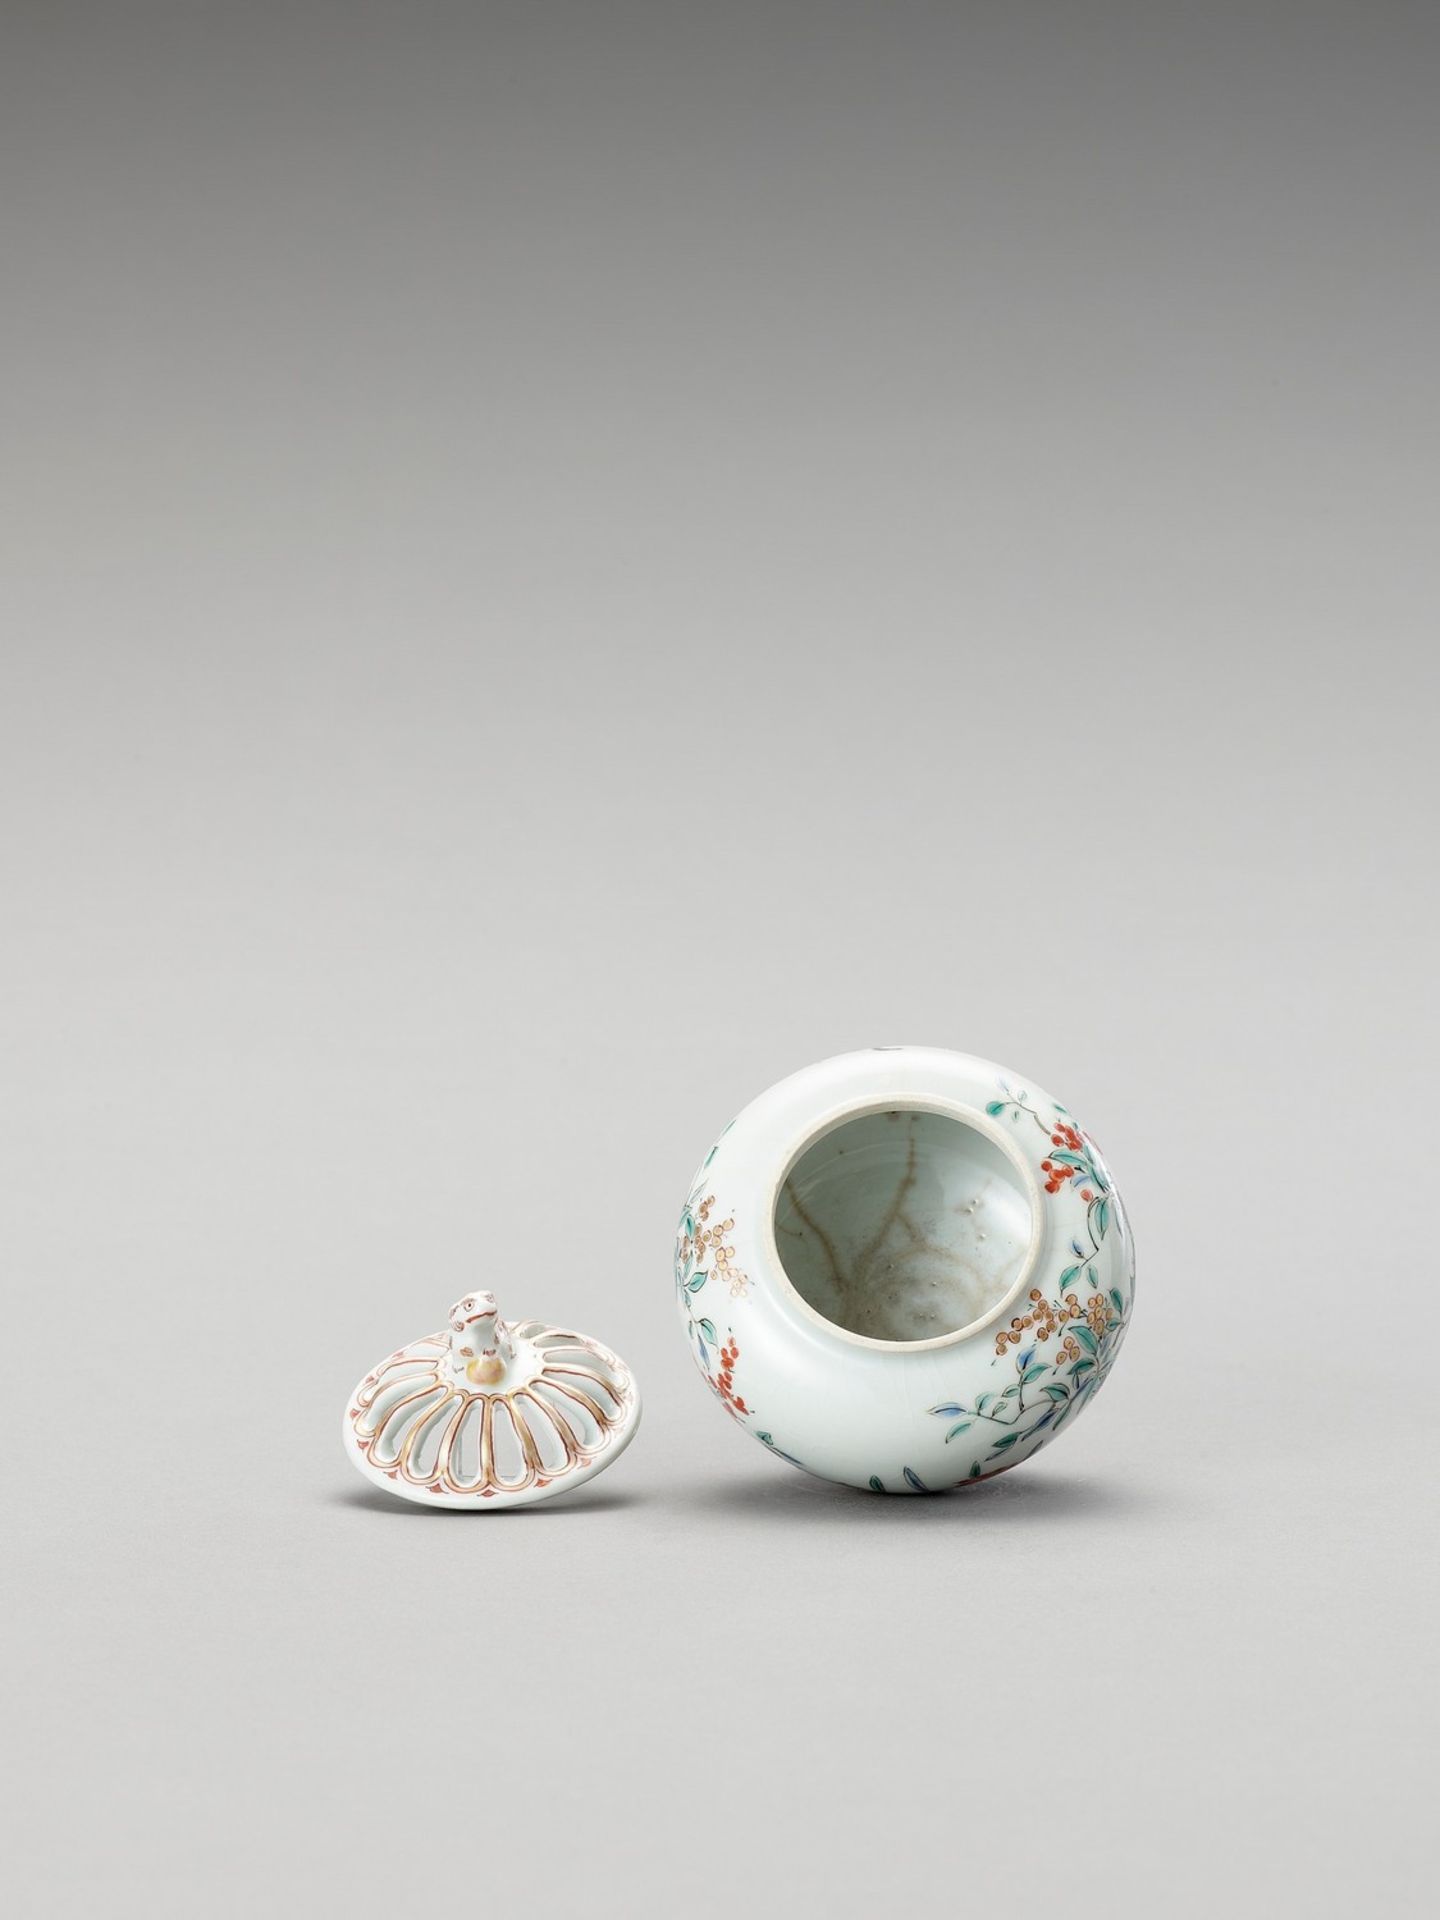 A CHARMING KAKIEMON PORCELAIN INCIENSE BURNER WITH COVER - Image 5 of 6